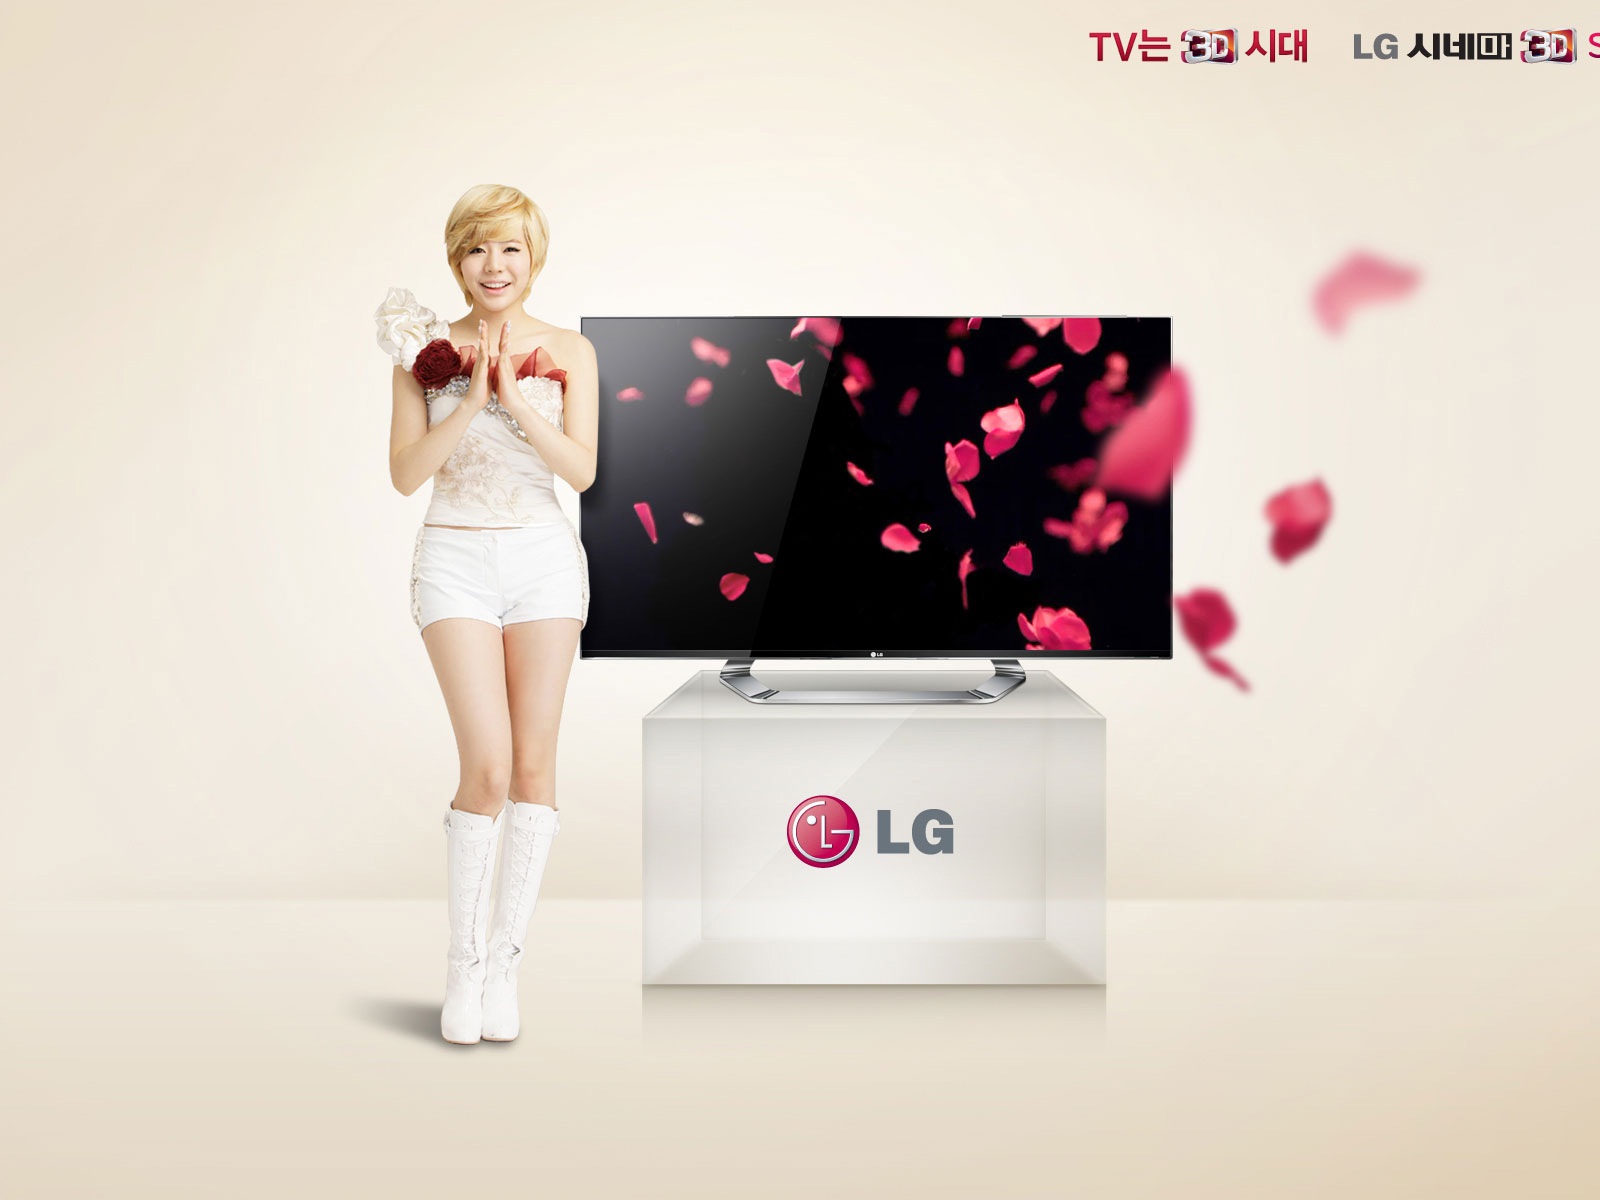 Girls Generation ACE and LG endorsements ads HD wallpapers #19 - 1600x1200